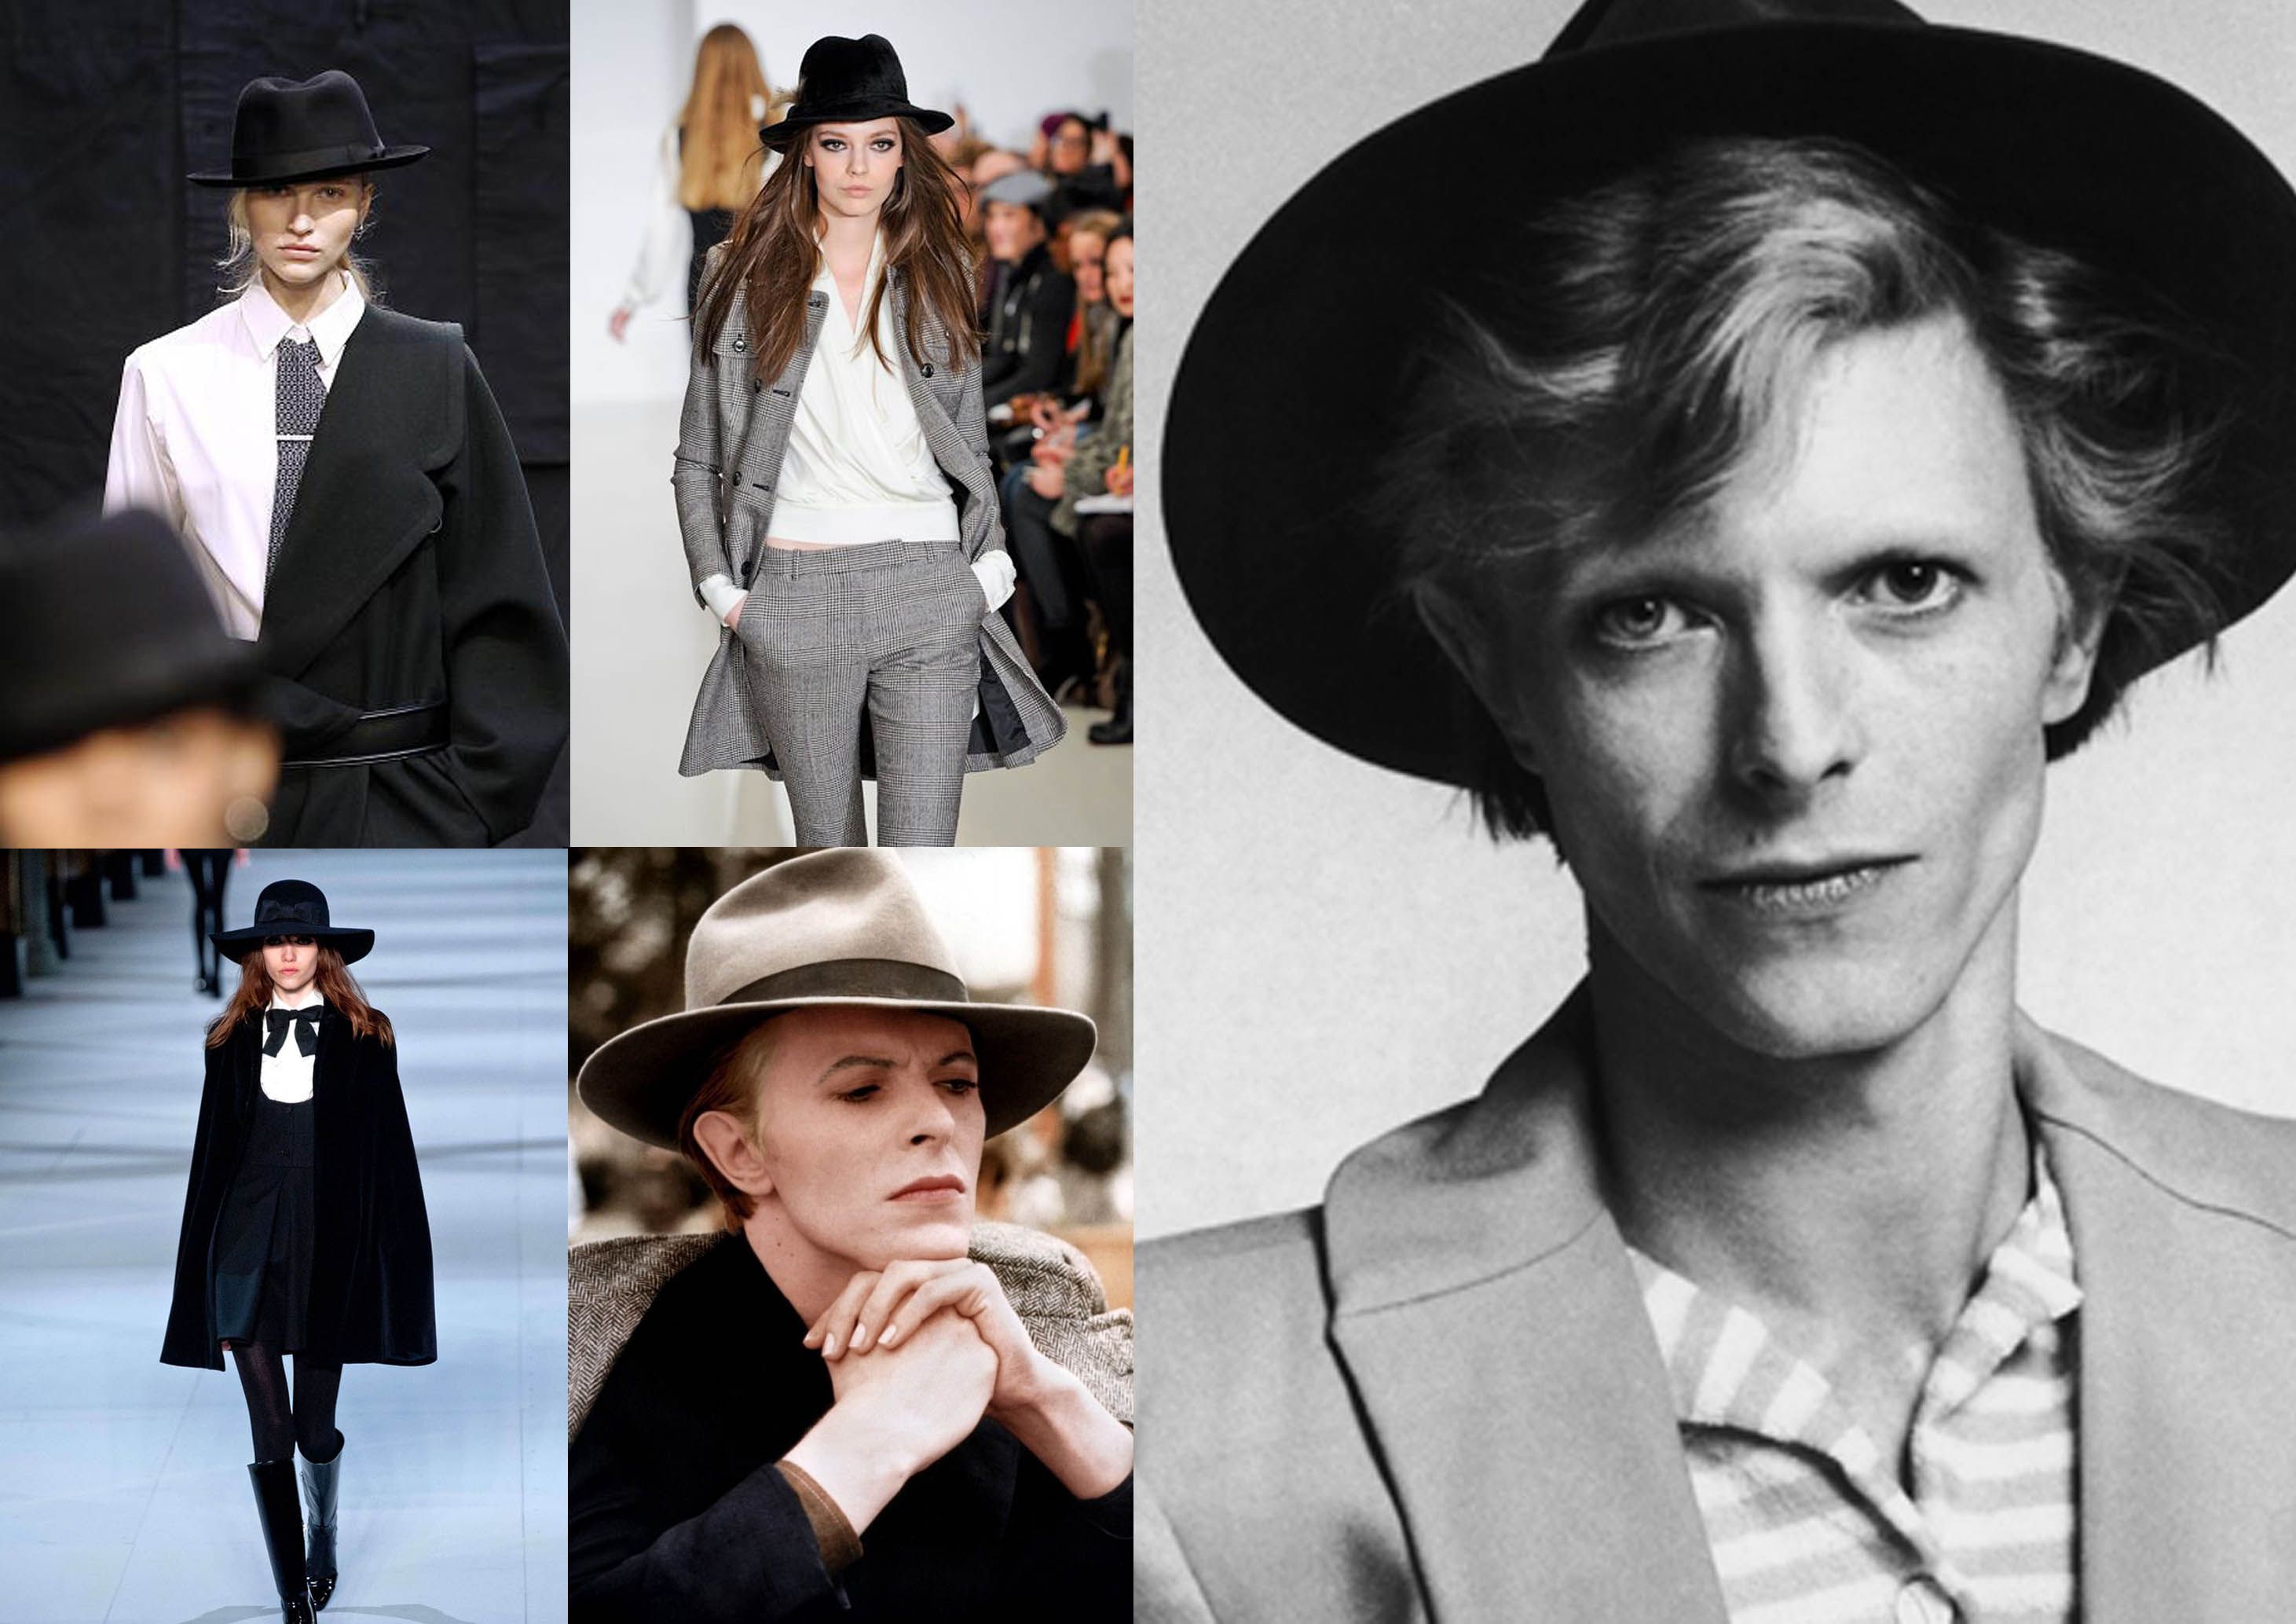 David Bowie, The World's Source of Inspiration for Fashion Artists, Designers and Models